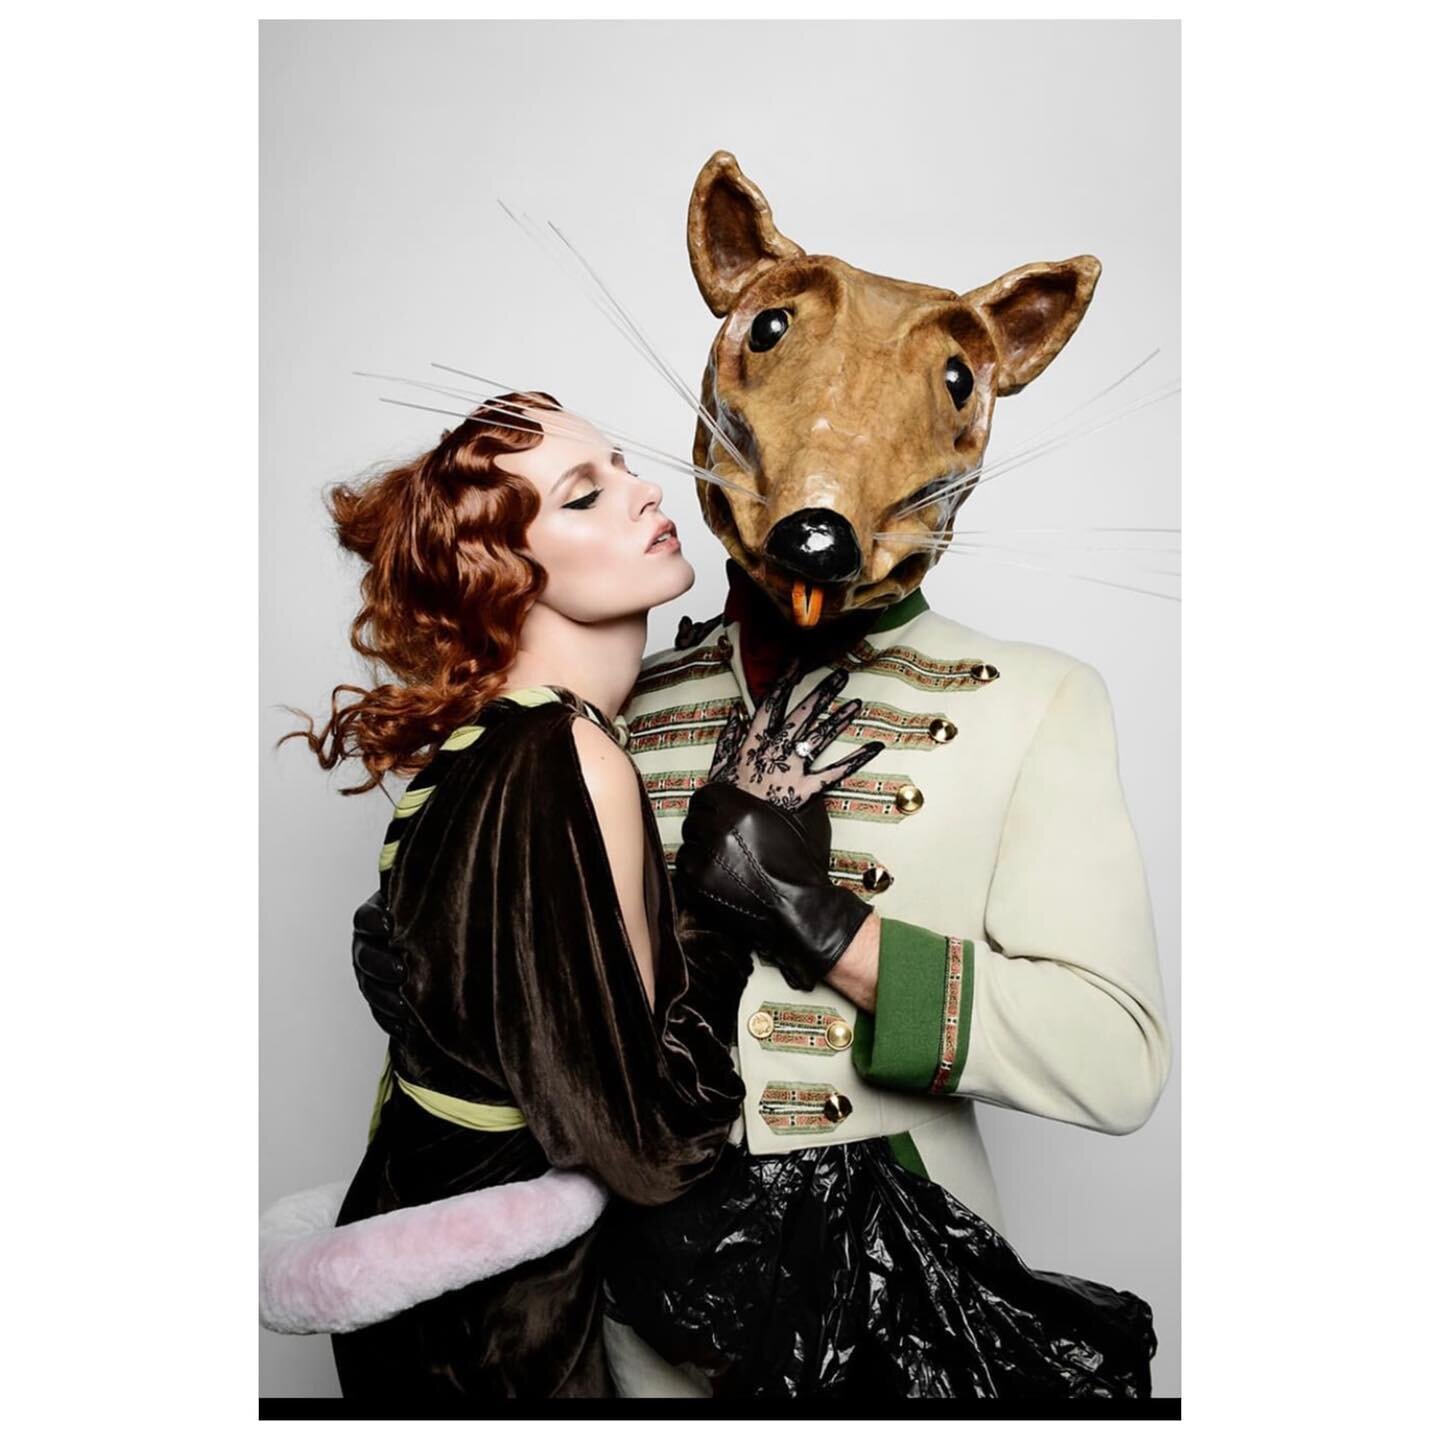 Beauty and the beast editorial for @basic_magazine 
Photography @ukmaracaibo
Model and actress @annewindsland
With #buddytherat @jonothonlyons 
Makeup @touchthisskin
#Hair @isaacdavidsonhair #wigbar 
Styling @styledbybruce
Full look @shopmorphew